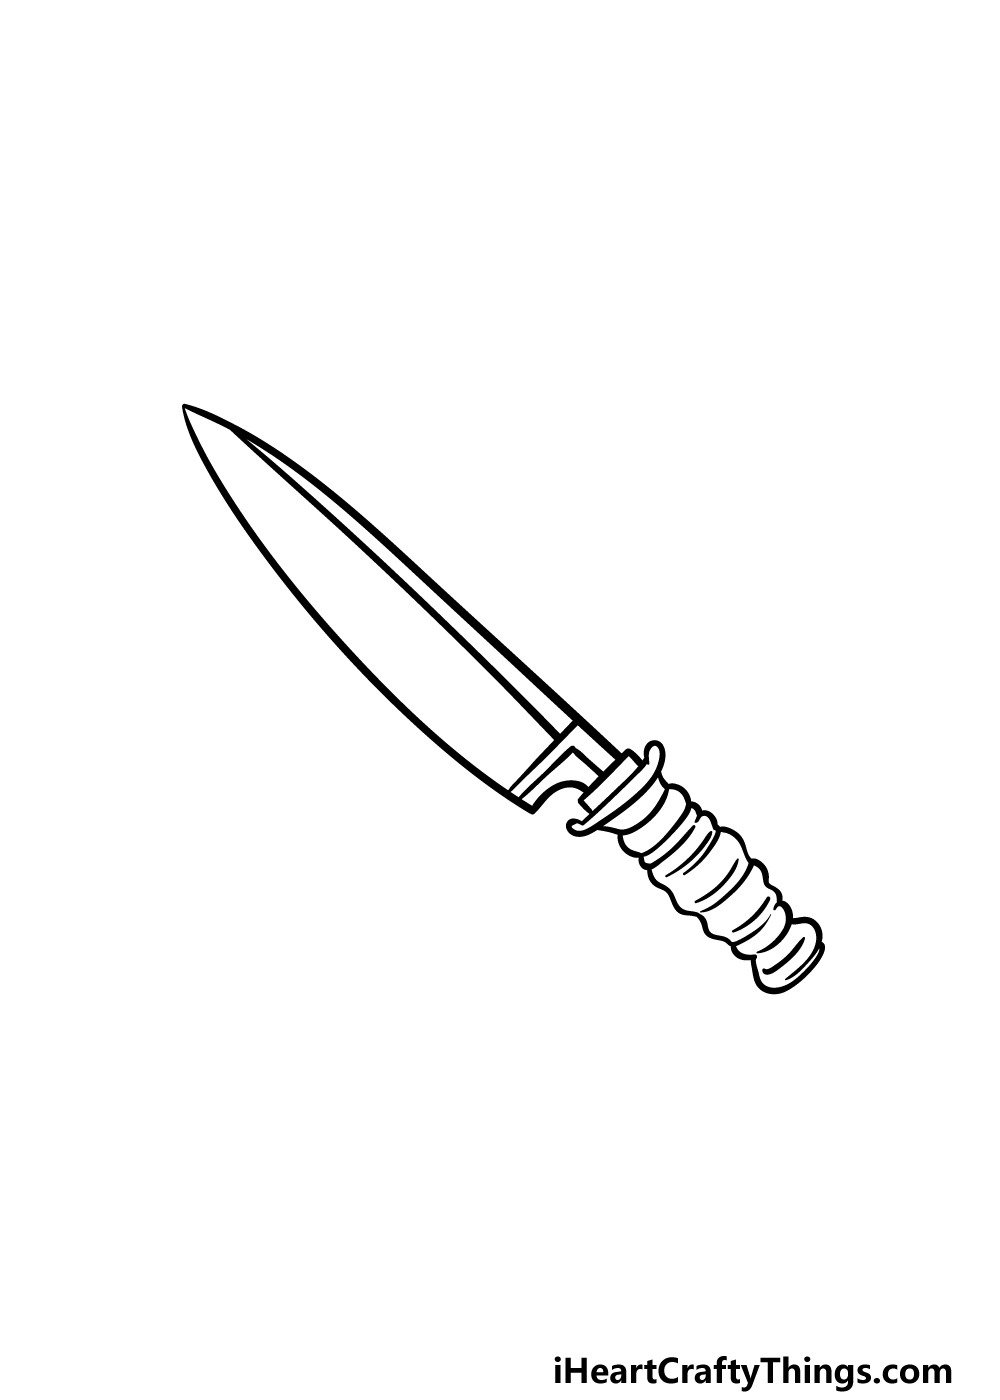 drawing a knife step 5